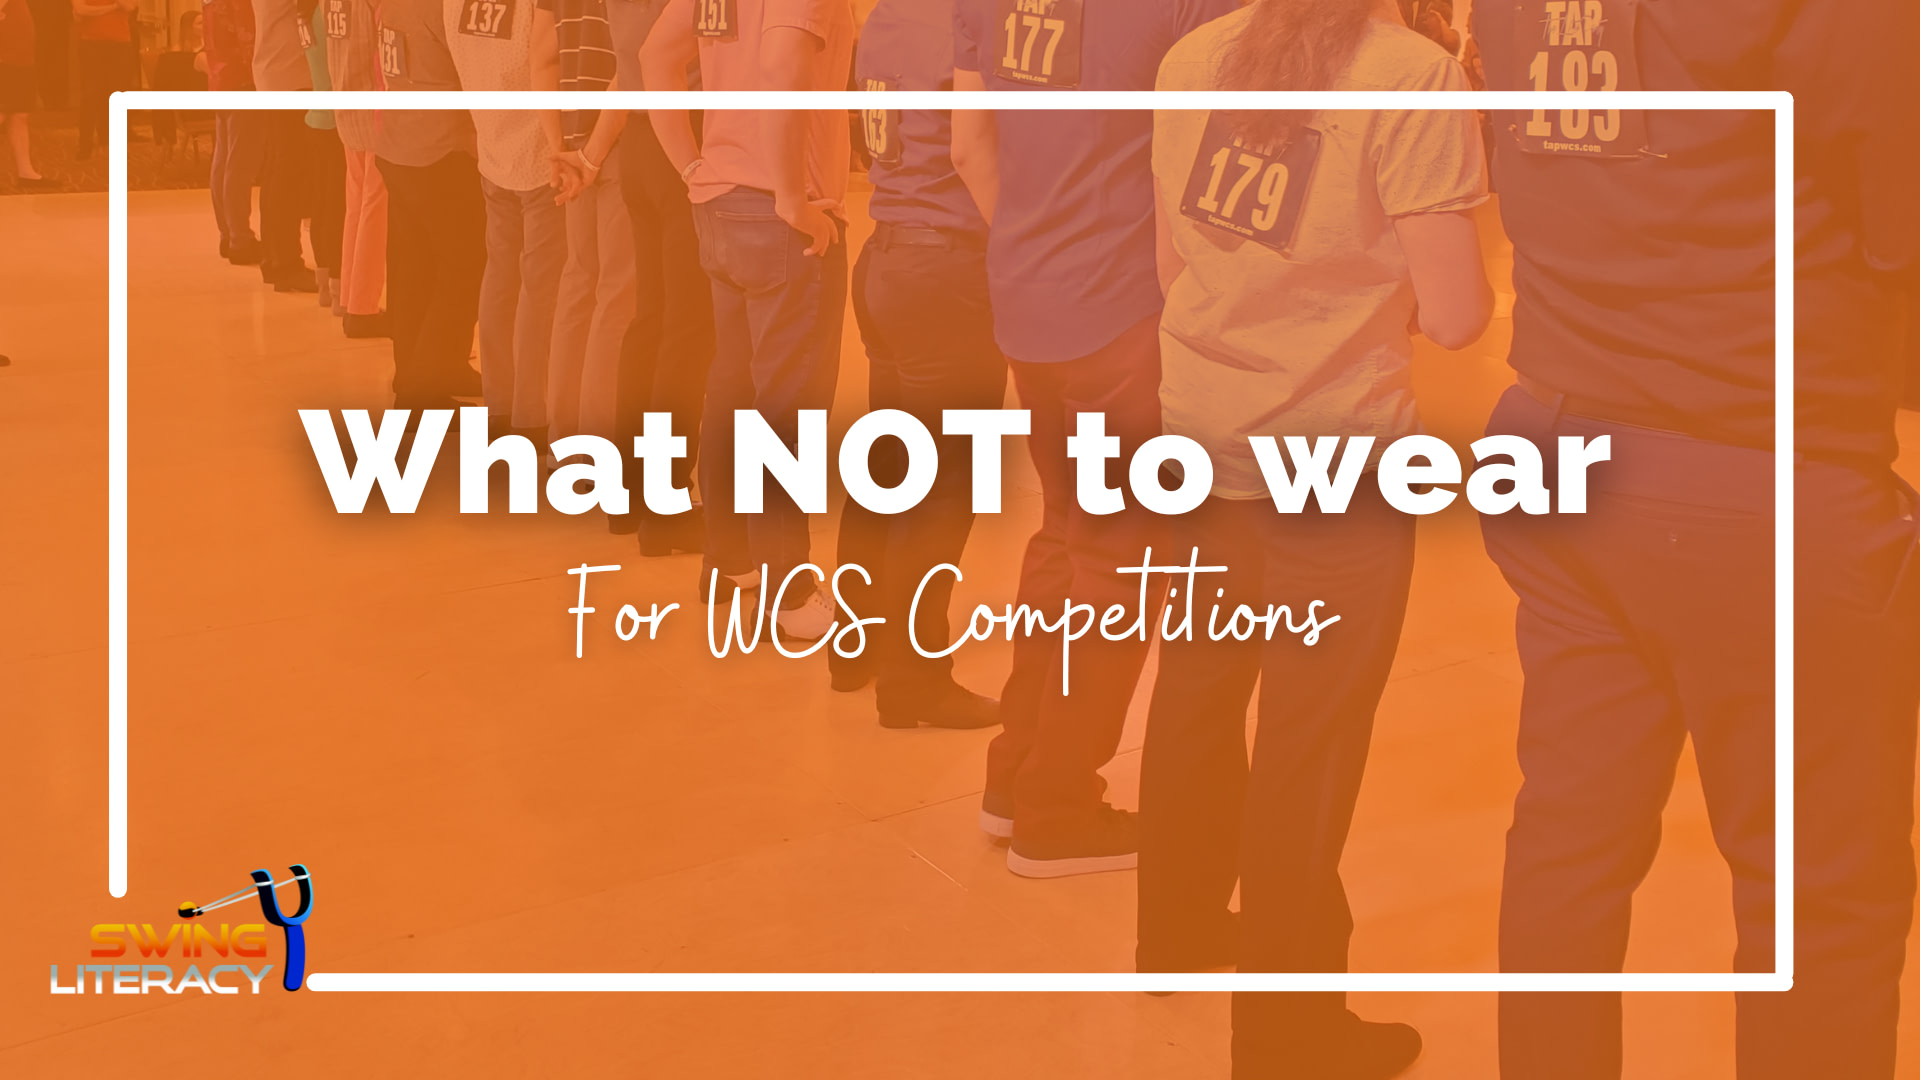 What Not to Wear for WCS Competitions